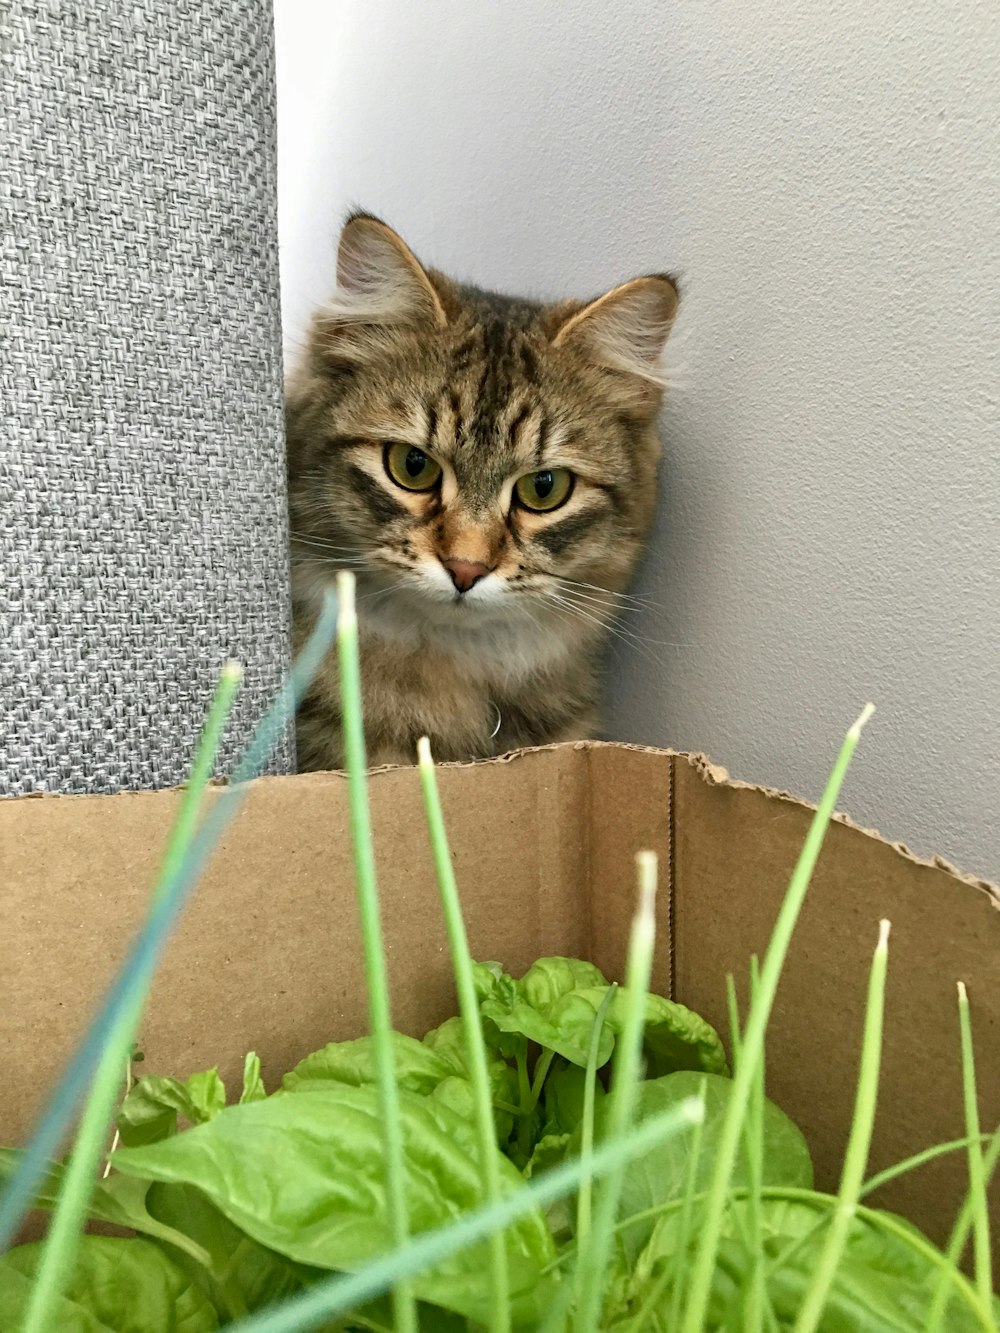 brown tabby cat looking at green leafed plants